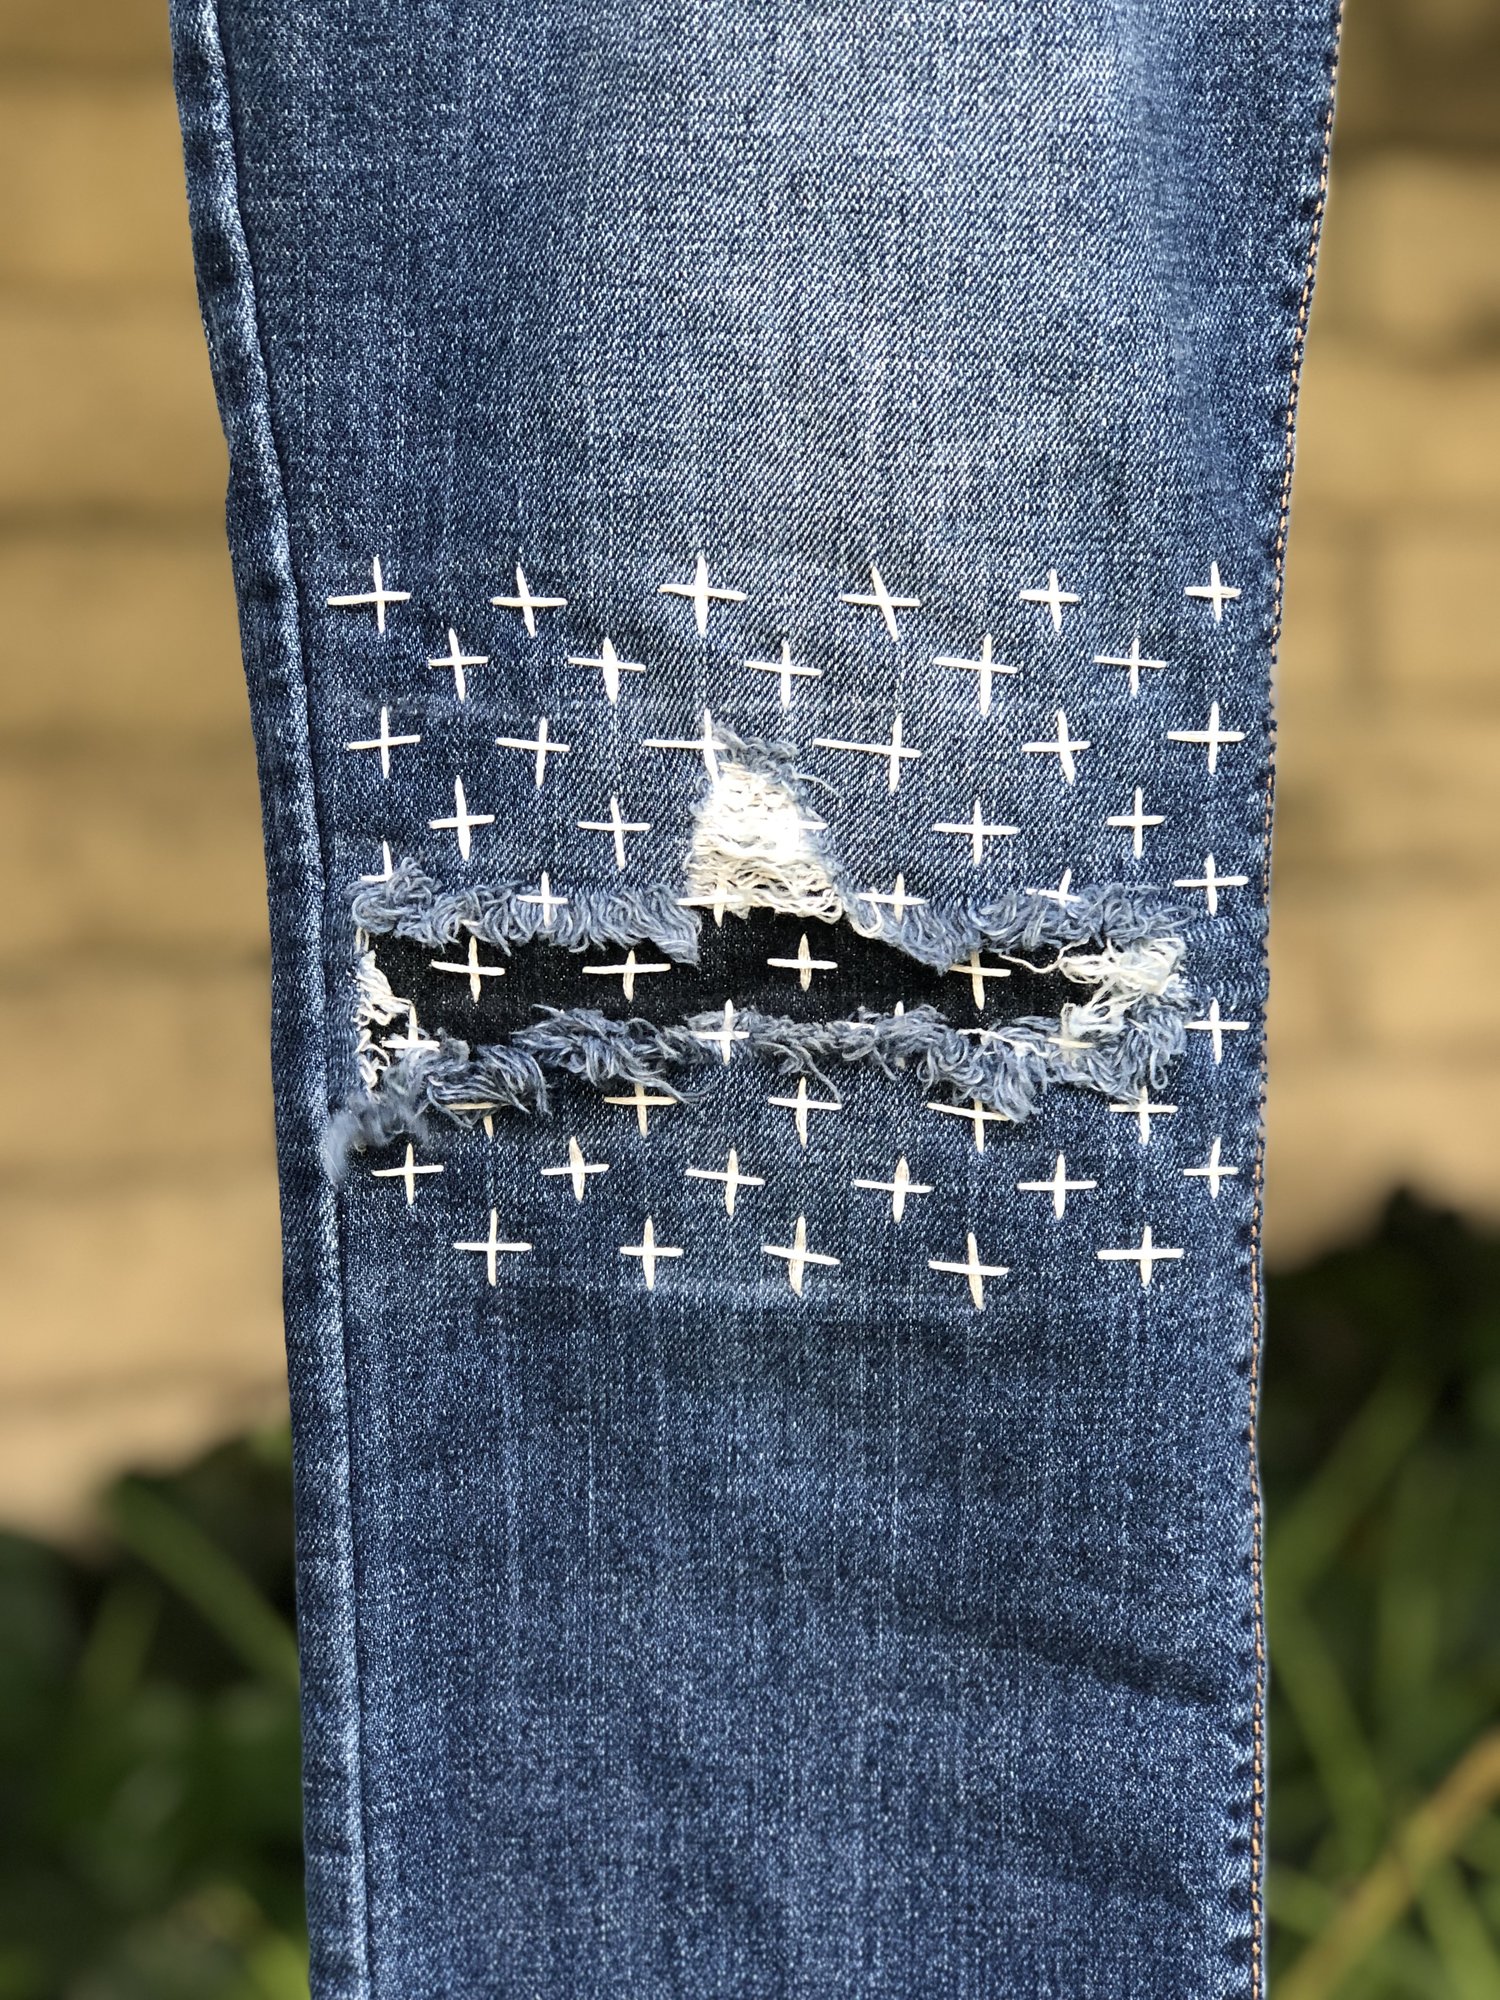 Boro stitched jeans fix up : r/Embroidery